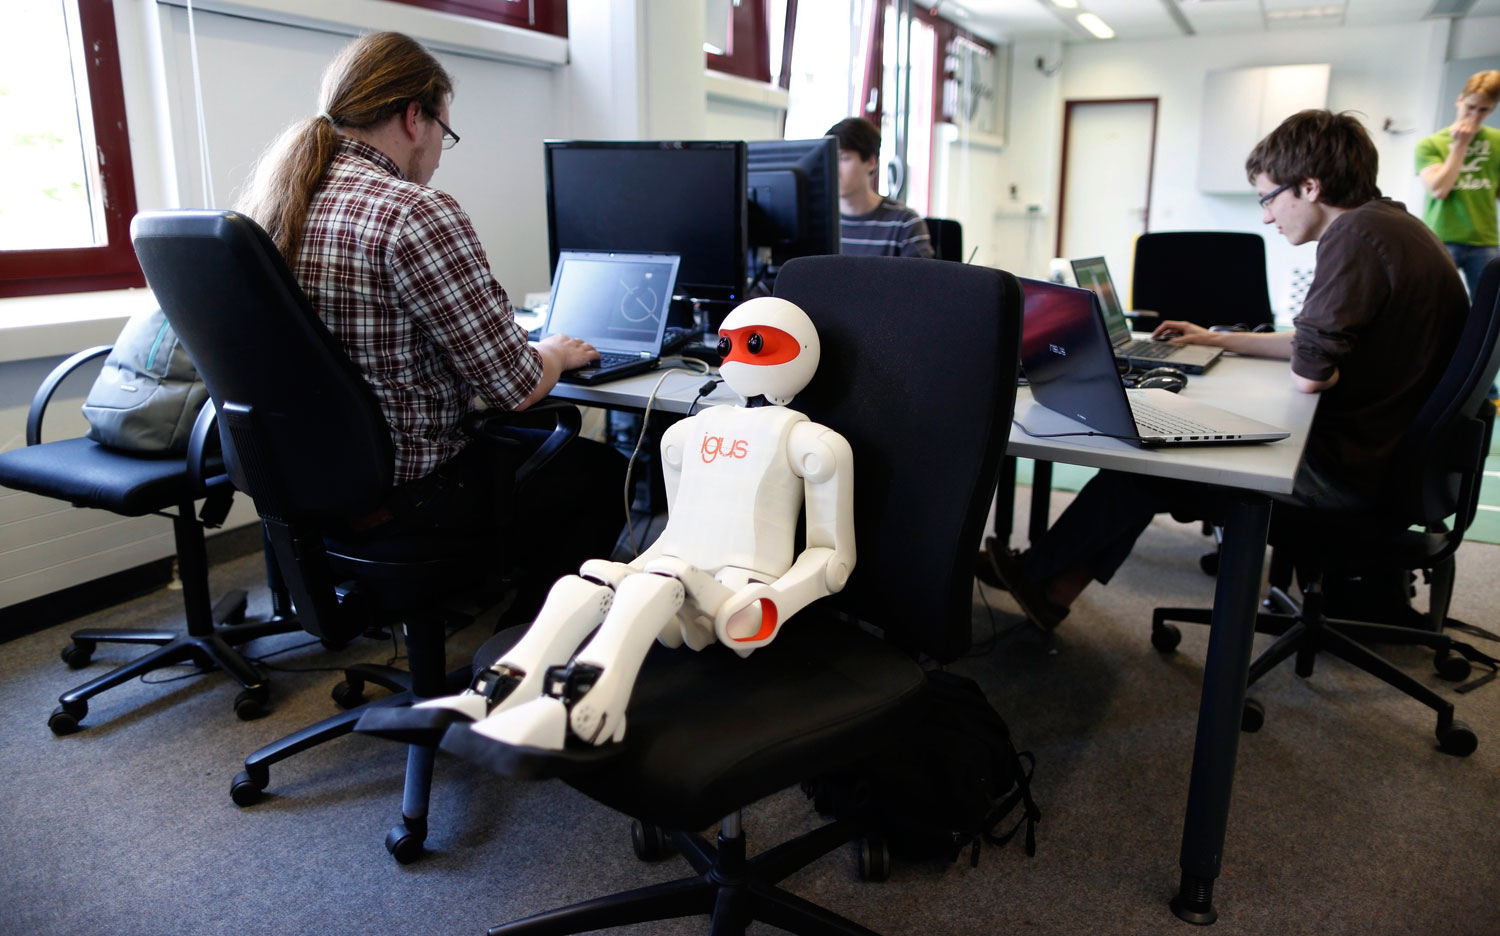 People work on the software of humanoid robots during a photo opportunity at the Institute for Computer Science at the University of Bonn in Bonn, Germany on July 3, 2014.